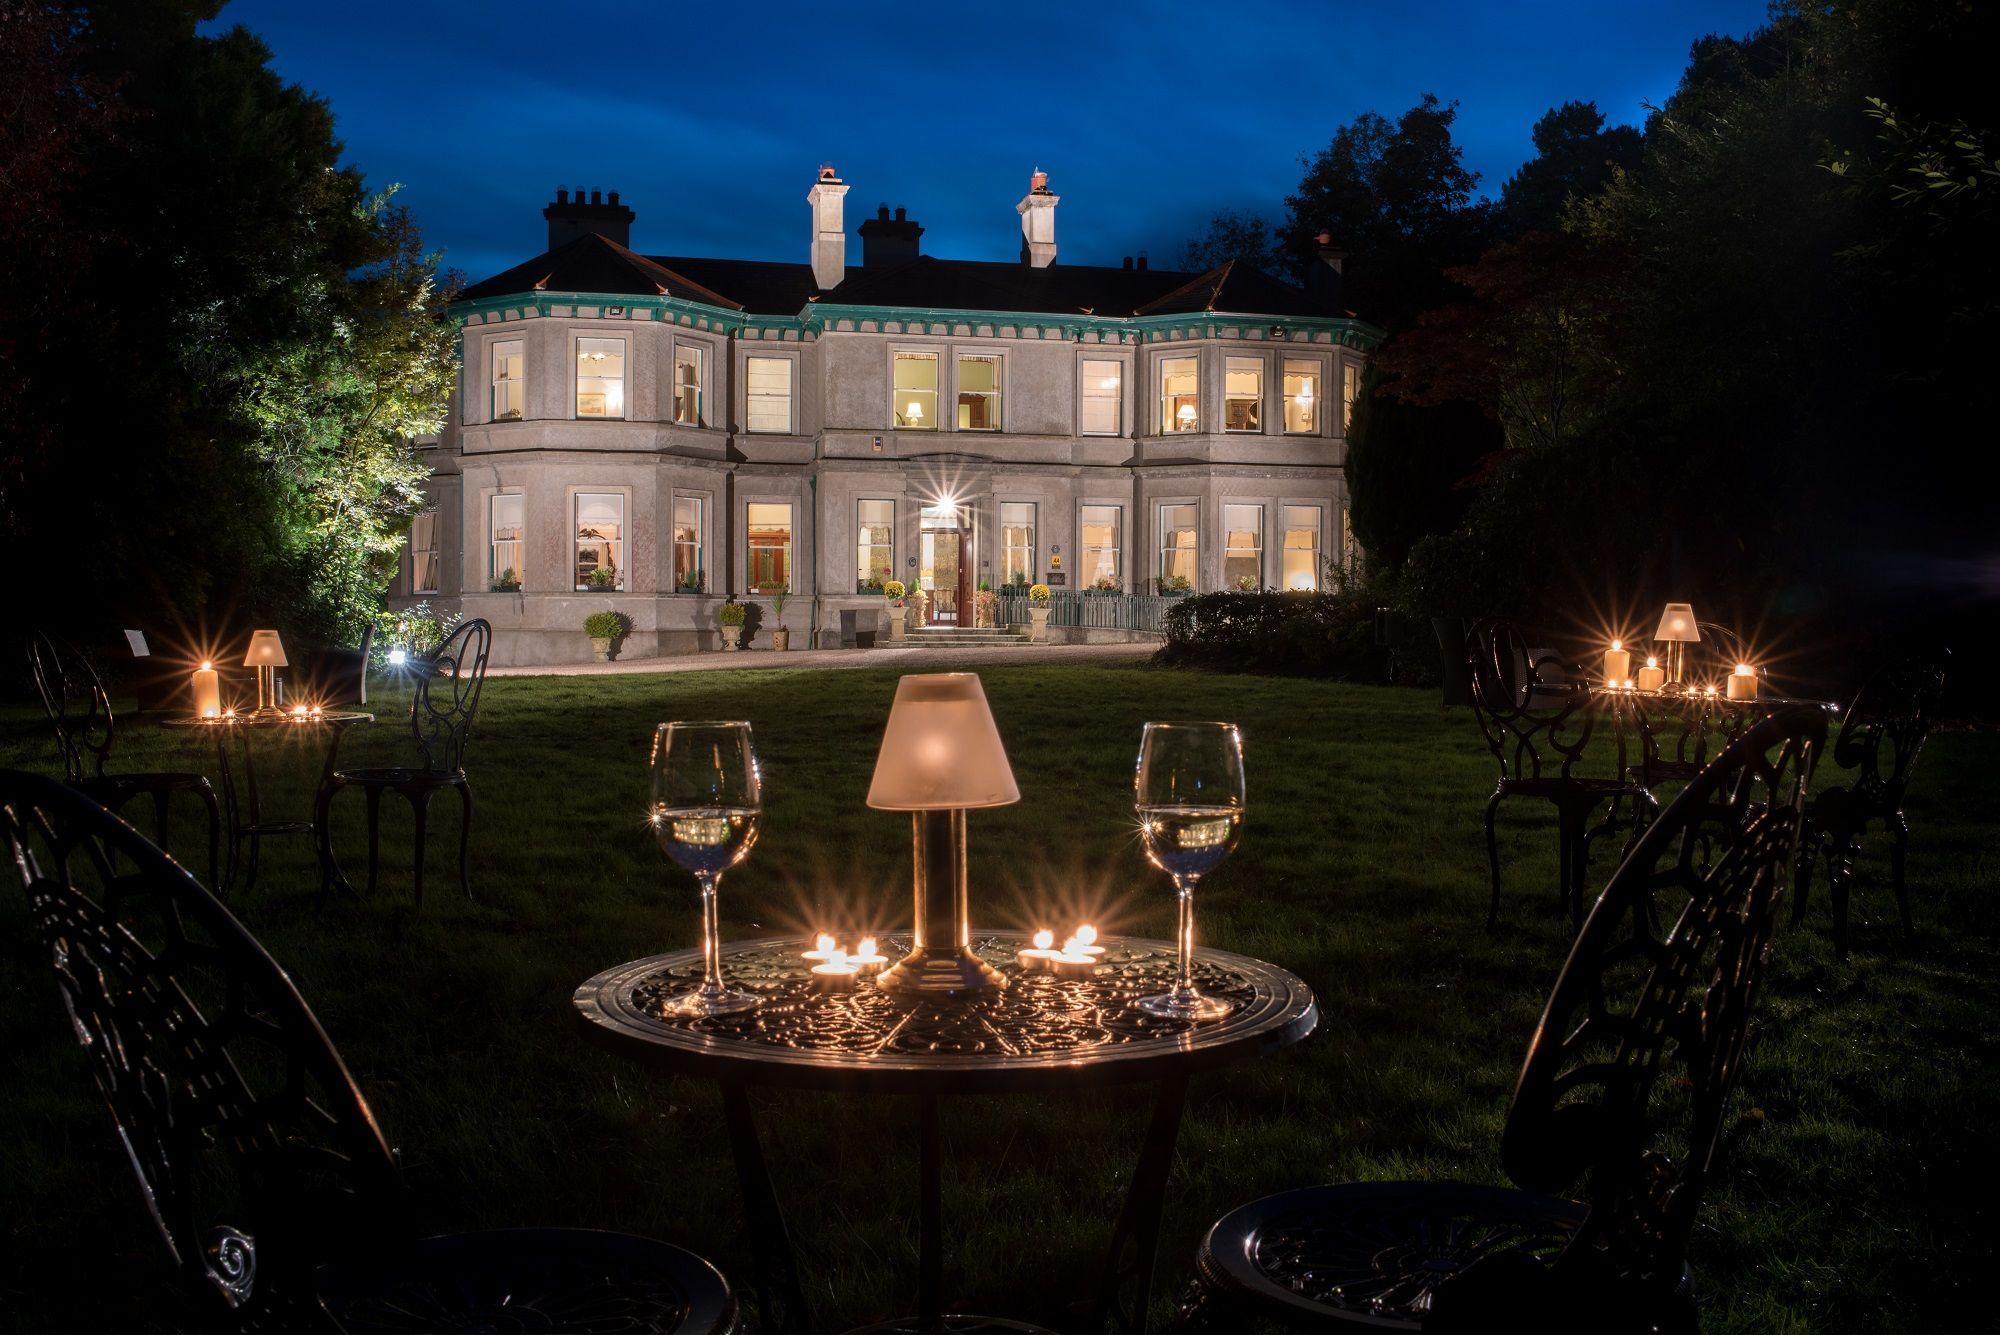 View Ardtara Country House's picturesque hotel within sensational Northern Ireland.